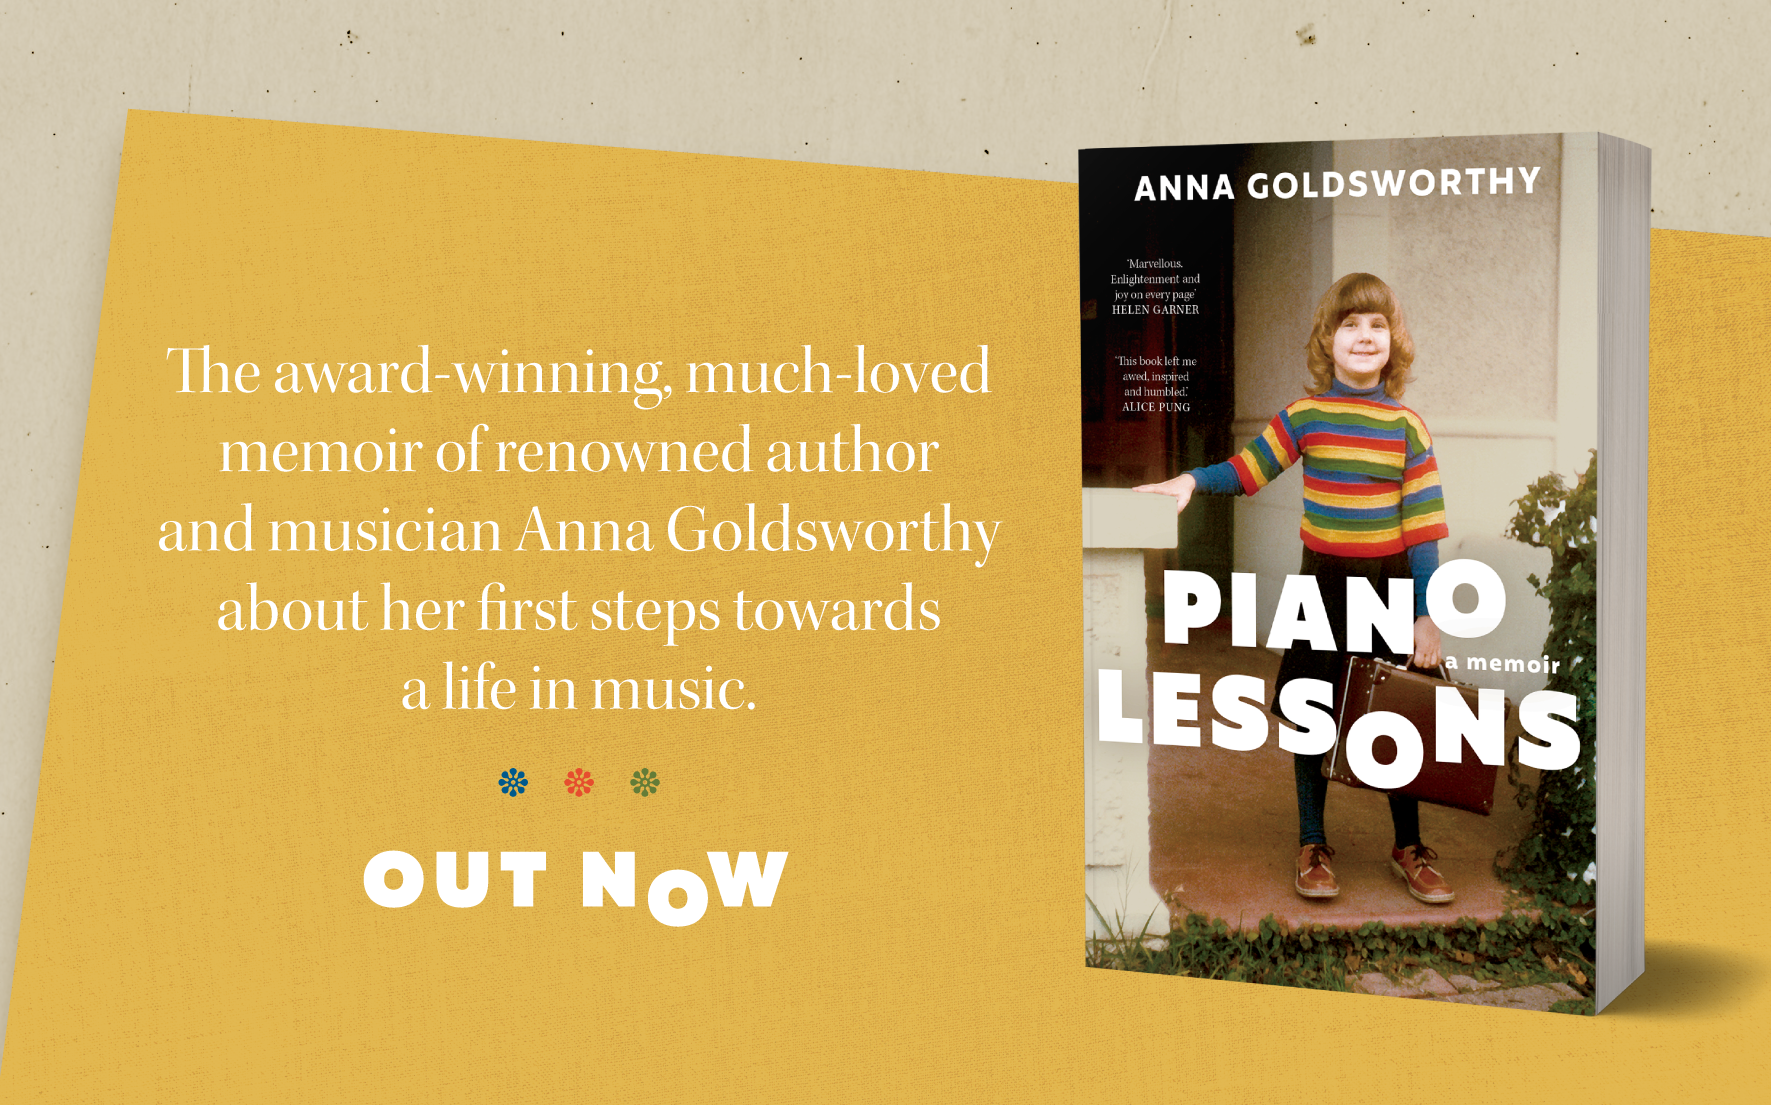 Out now: Piano Lessons